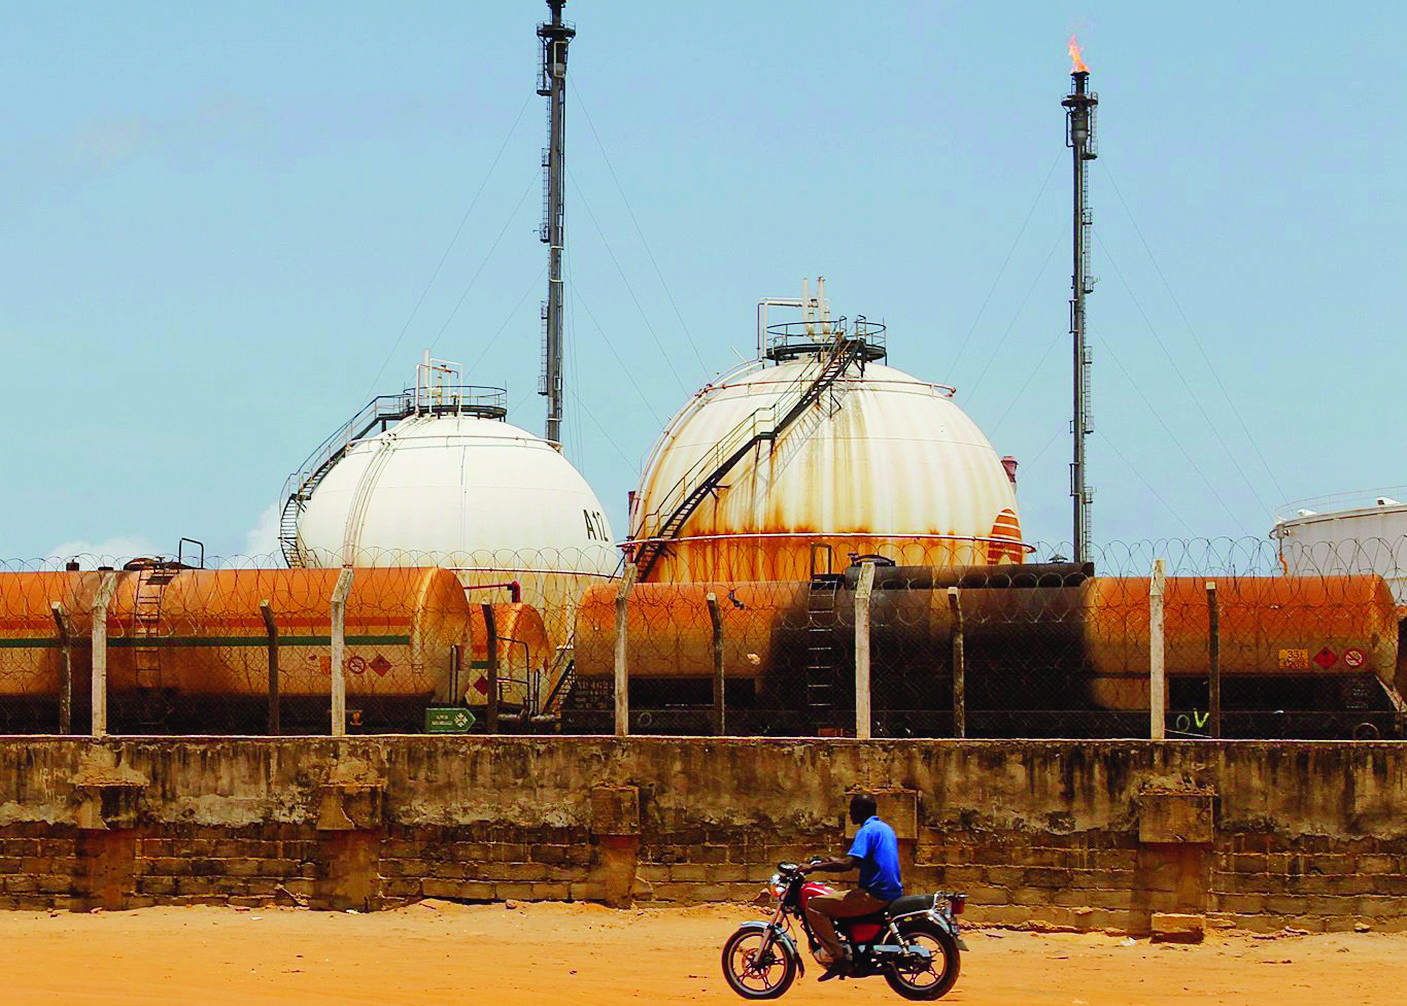 epa05281730 A photograph made available 28 April 2016 shows a motorcyclist riding in front of the Ivorien Society of Refinage facility (Société Ivoirienne de Refinage (SIR) in Abidjan, Ivory Coast 26 April 2016. According to global energy consultancy group Wood Mackenzie Africa's place as a significant producer and net exporter of oil in the world is forecast to grow to 15 per cent by 2020 due to new discoveries in West Africa. Substantial growth potential exists in West Africa with 40 billion barrels of discovered but undeveloped reserves and 55 billion barrels of yet-to-find oil. Since Jubilee discovery in 2007 companies are exploring other parts of the region between Ghana to Mauritania looking for analogous Cretaceous turbidite prospects. Offshore explorations in Sierra Leone and the Ivory Coast are high potential areas for investment beyond that of Nigeria and Angola.  EPA/LEGNAN KOULA ELFENBEINKUESTE BENZIN